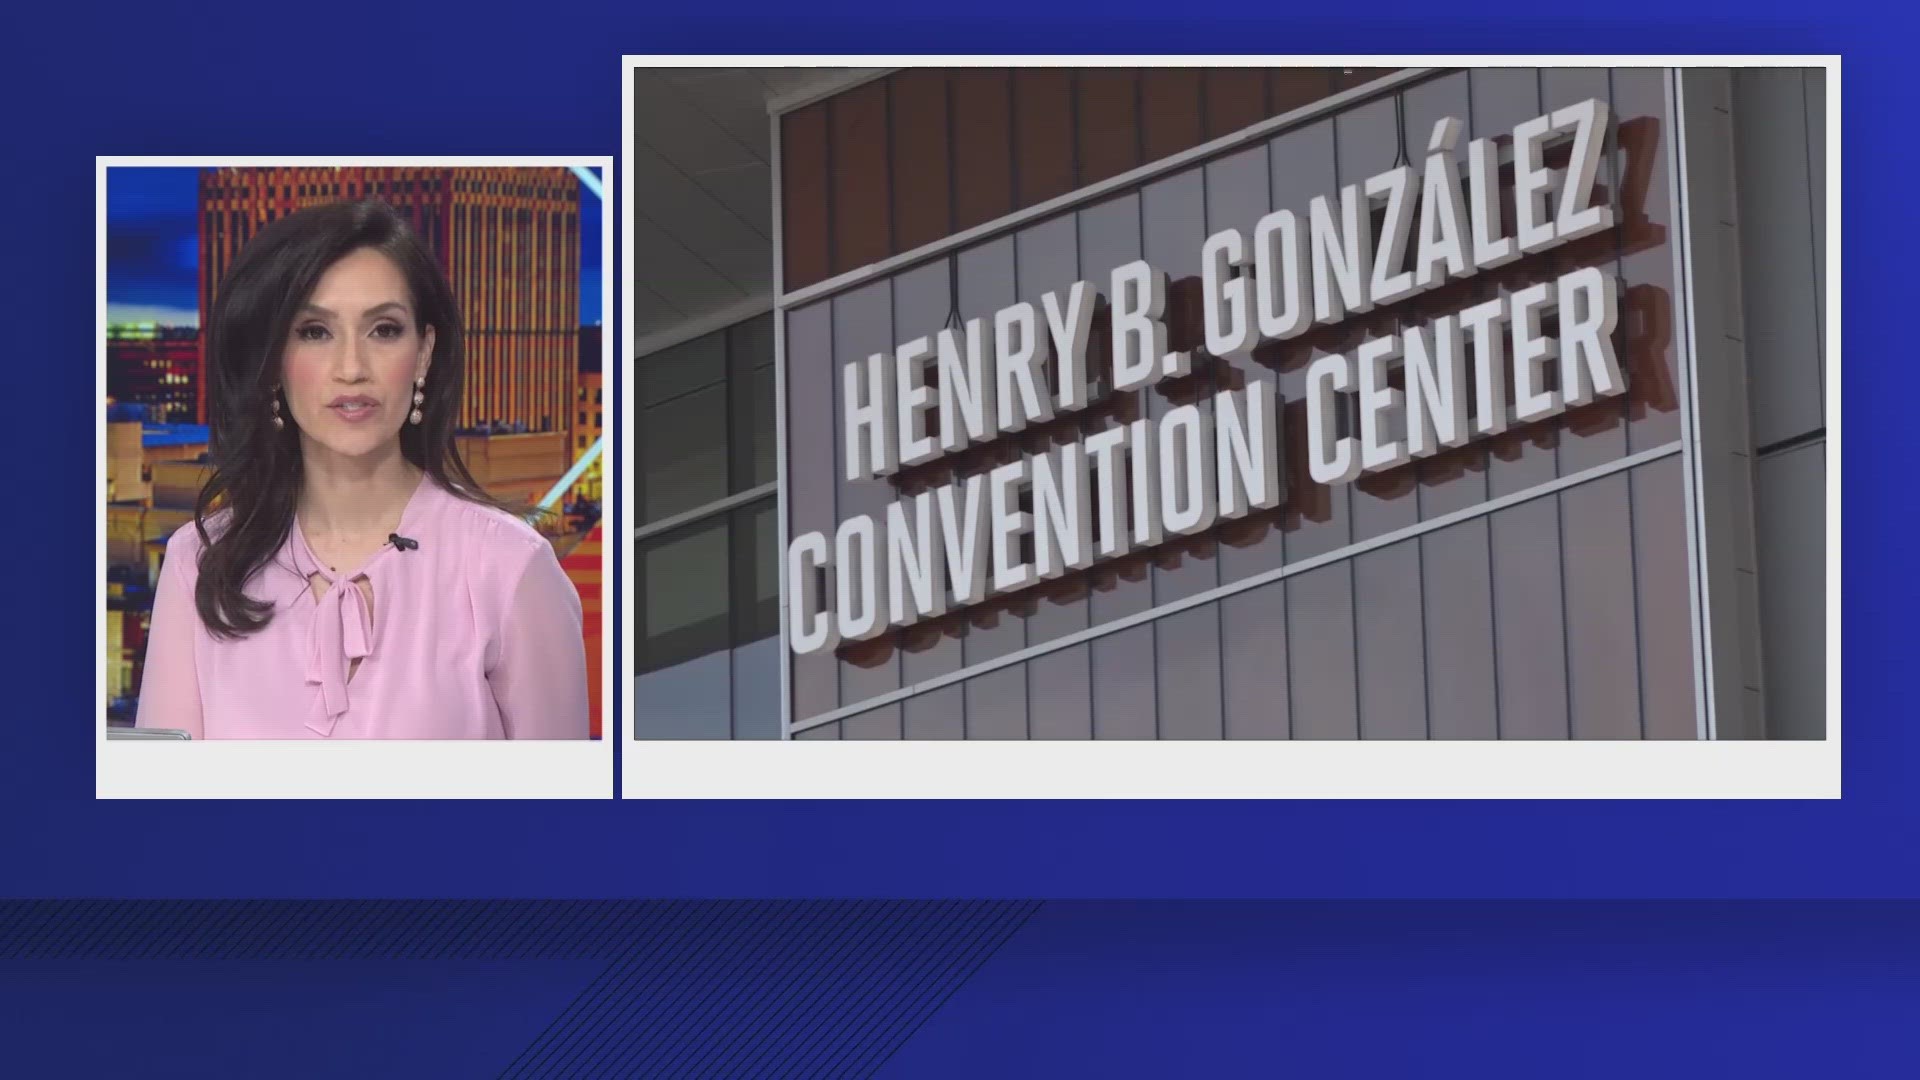 The women worked at the Henry B. Gonzalez Convention Center.